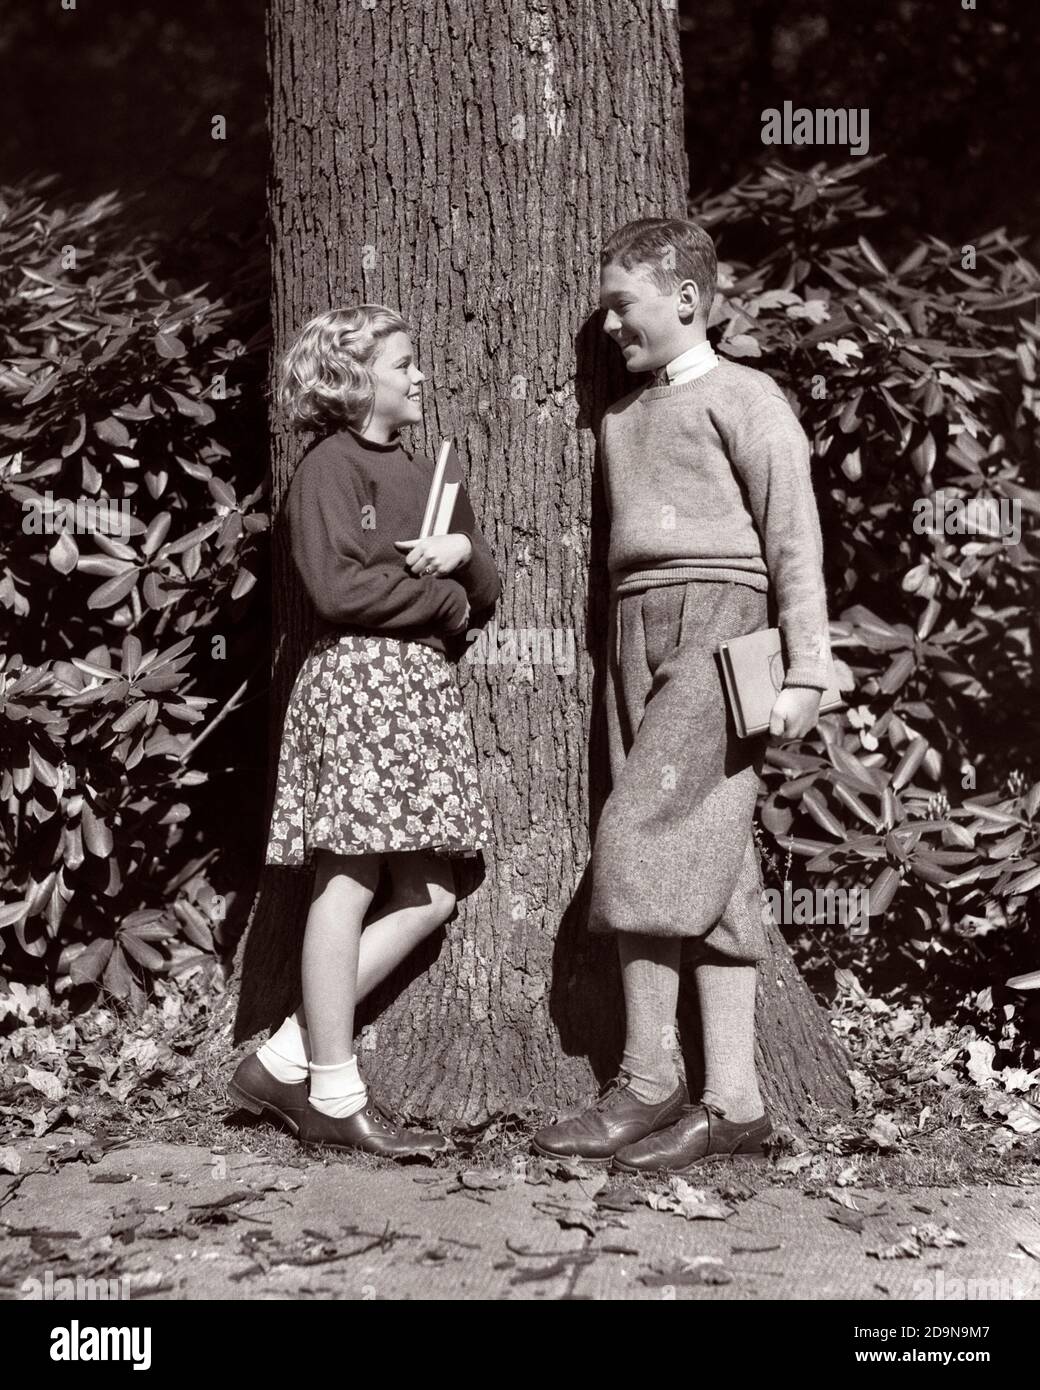 1930s SMILING BOY AND GIRL PRETEENS TEENAGE FRIENDS LEANING AGAINST TREE HOLDING TEXTBOOKS TALKING LISTENING SOCIALLY LEARNING  - s6636 HAR001 HARS 1 JUVENILE STYLE FRIEND JOY LIFESTYLE FEMALES HEALTHINESS COPY SPACE AGAINST FRIENDSHIP FULL-LENGTH PERSONS MALES TEENAGE BOY B&W HAPPINESS AND FEELING PRETEEN TEXTBOOKS FRIENDLY STYLISH TEENAGED CRUSH KNICKERBOCKERS PLUS FOURS PUPPY LOVE AFFECTION CHILDHOOD INFORMAL JUVENILES MIDDLE SCHOOL PLATONIC PRE-TEEN PRE-TEEN GIRL TOGETHERNESS BLACK AND WHITE CAUCASIAN ETHNICITY FIRST LOVE HAR001 IMMATURE OLD FASHIONED Stock Photo